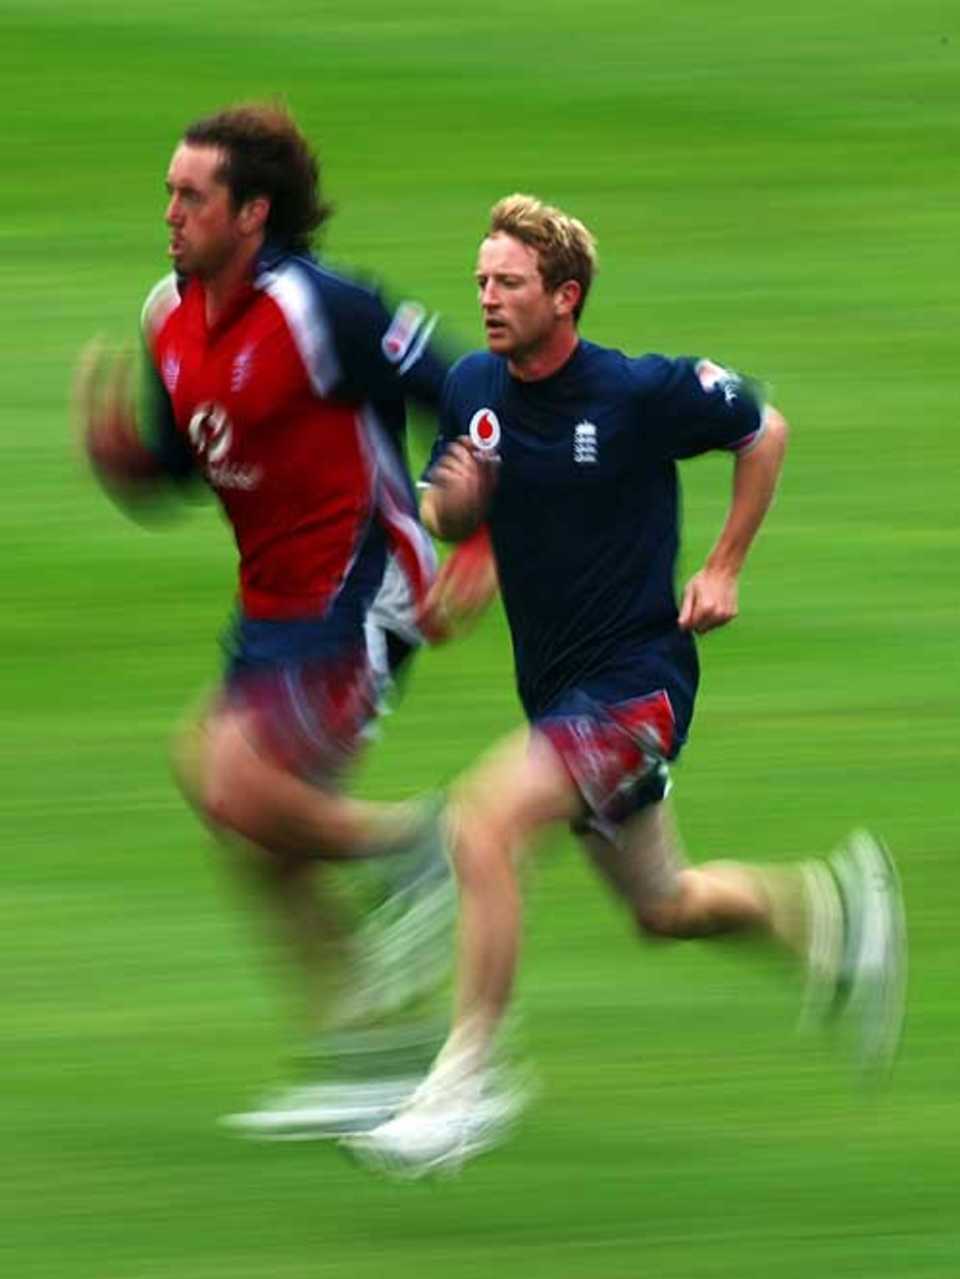 Ryan Sidebottom and Paul Collingwood test out their hamstring injuries, New Zealand Select XI v England XI, Dunedin, March 1, 2008